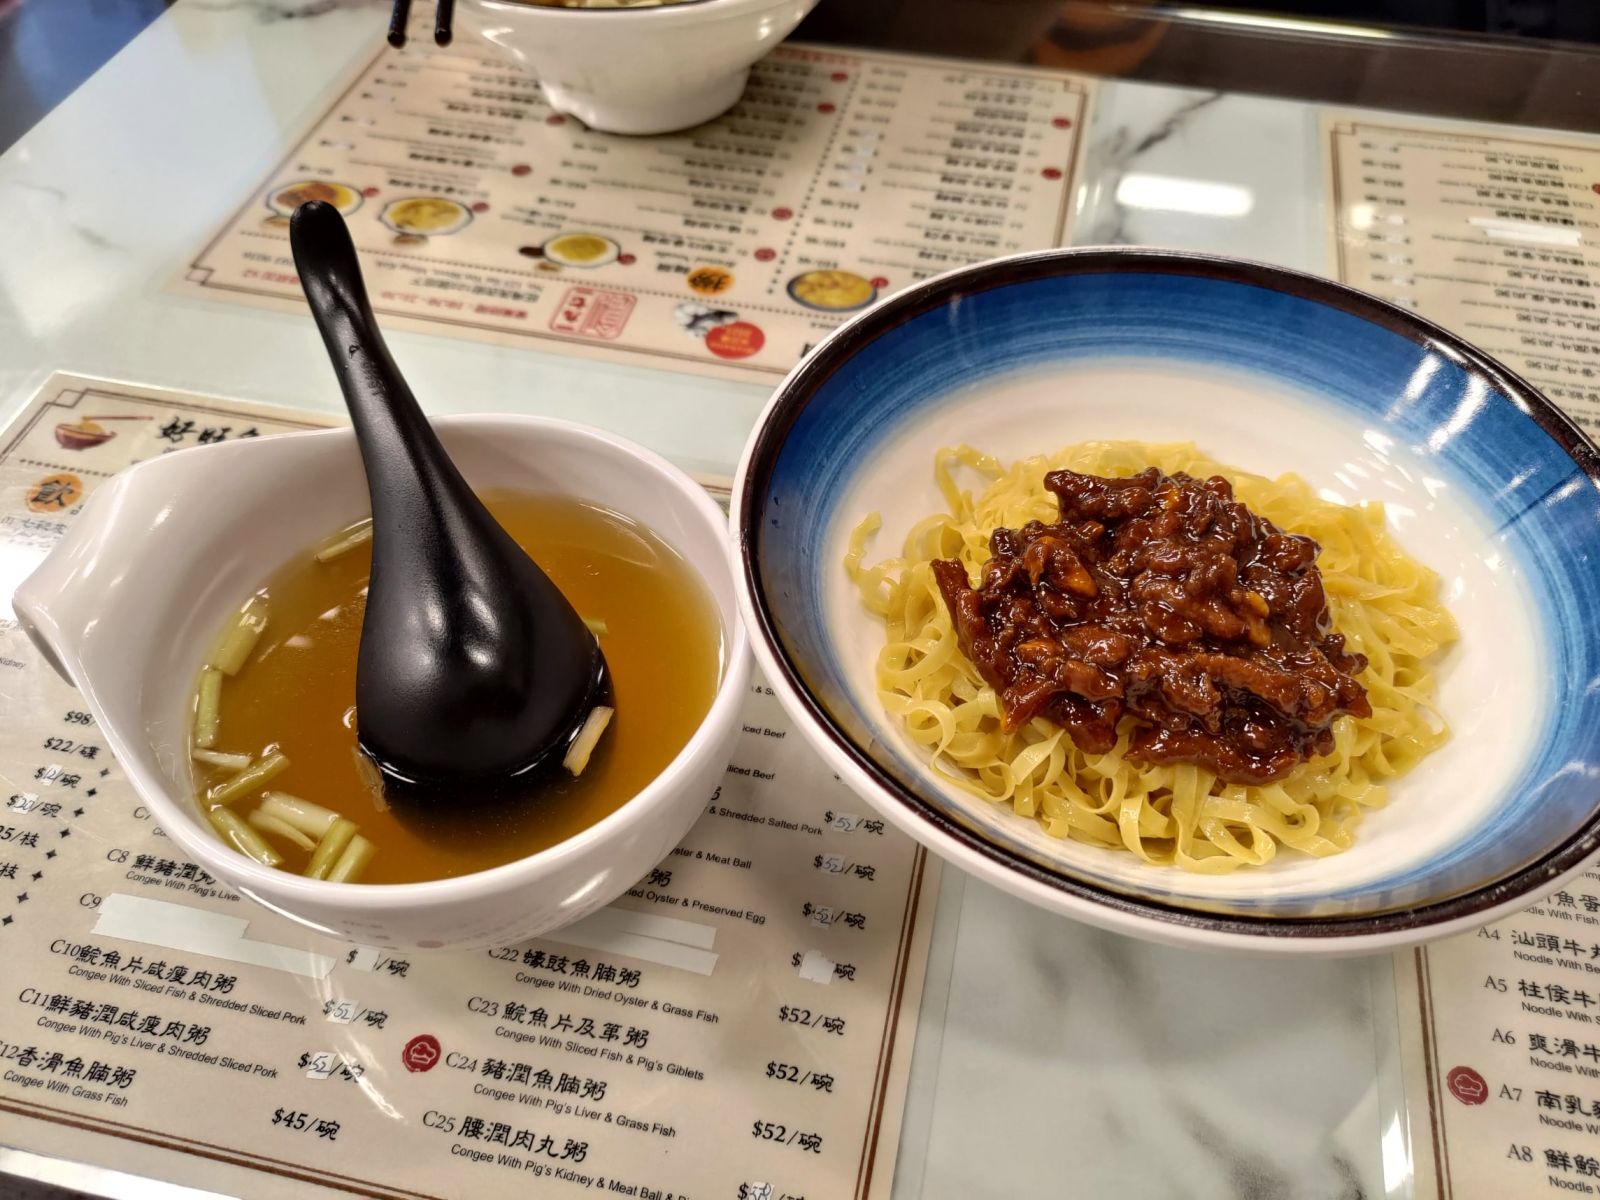 Braised Noodle With Shredded Pork and Special Sauce (炸醬麵) comes with two sizes - a bowl for small and a plate for big